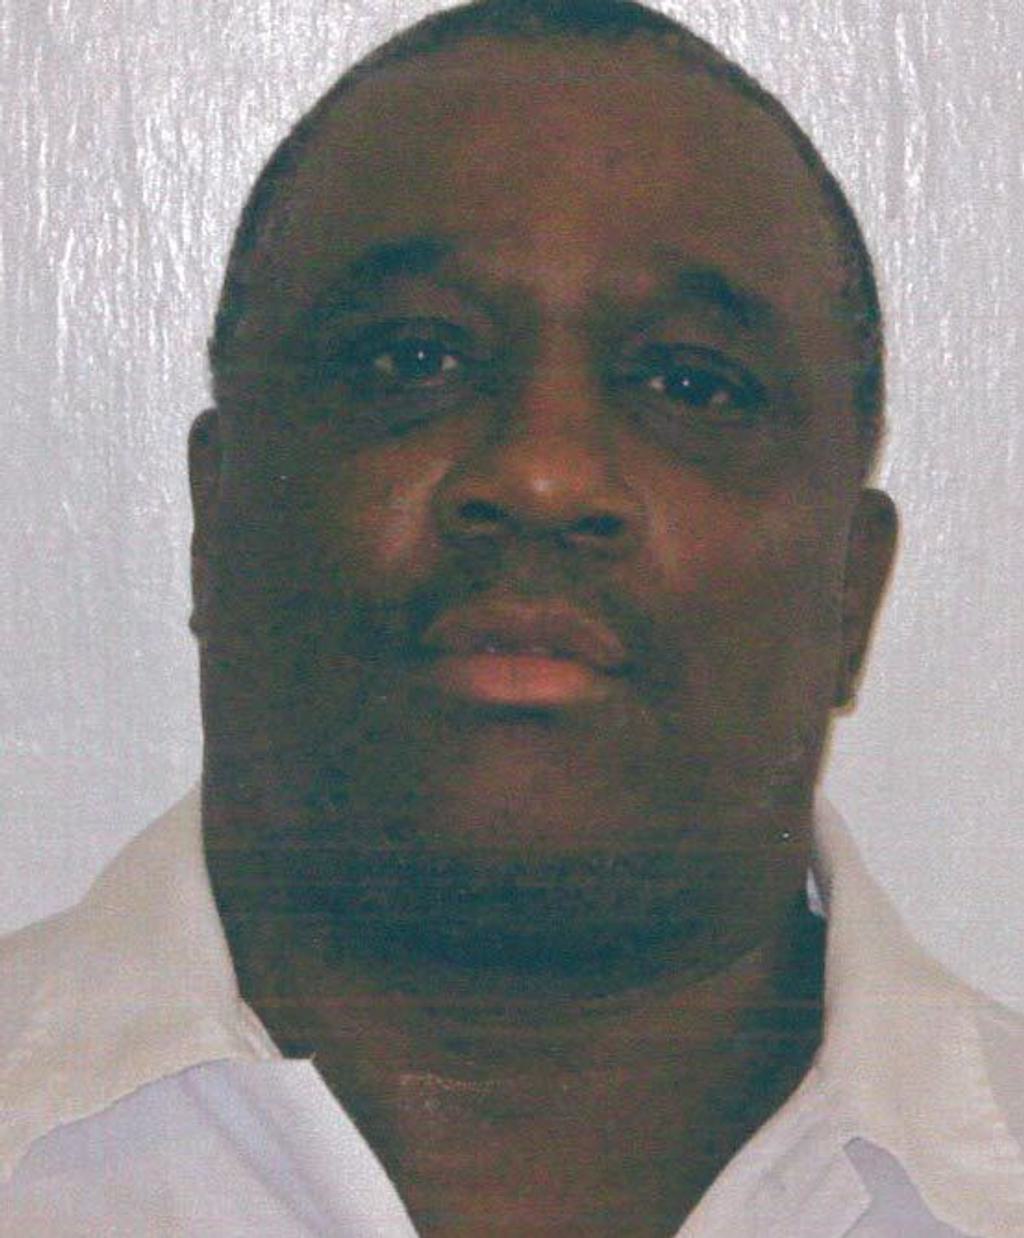 He May Be Innocent and Intellectually Disabled, But Rocky Myers Faces Execution in Alabama